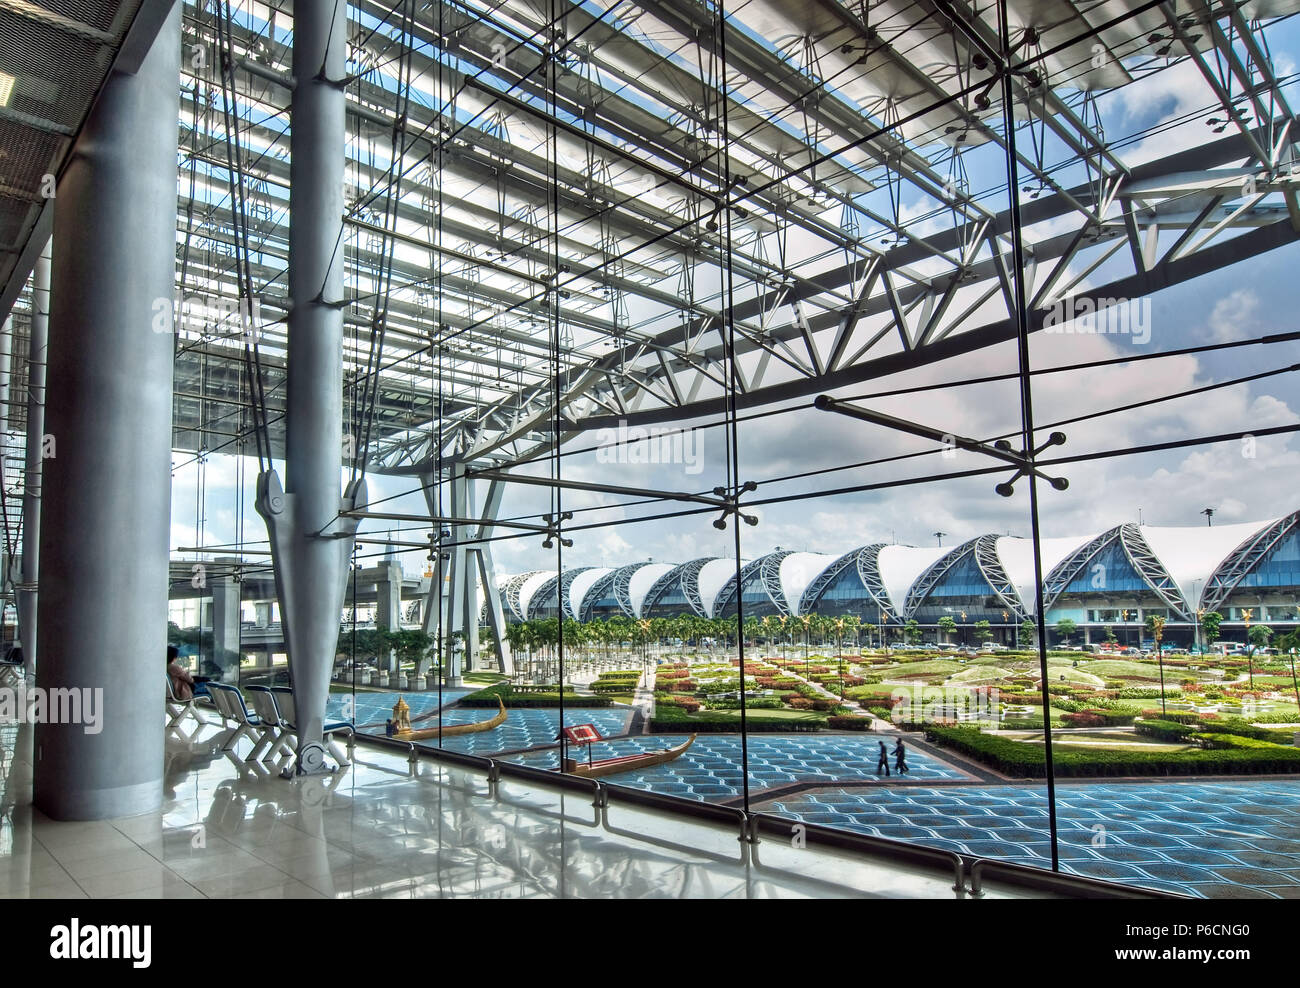 A travel hub of Asia, glass, stainless steel stretched fabric make the architectural superstructure of Bangkok's Suvarnabhumi International Airport. Stock Photo